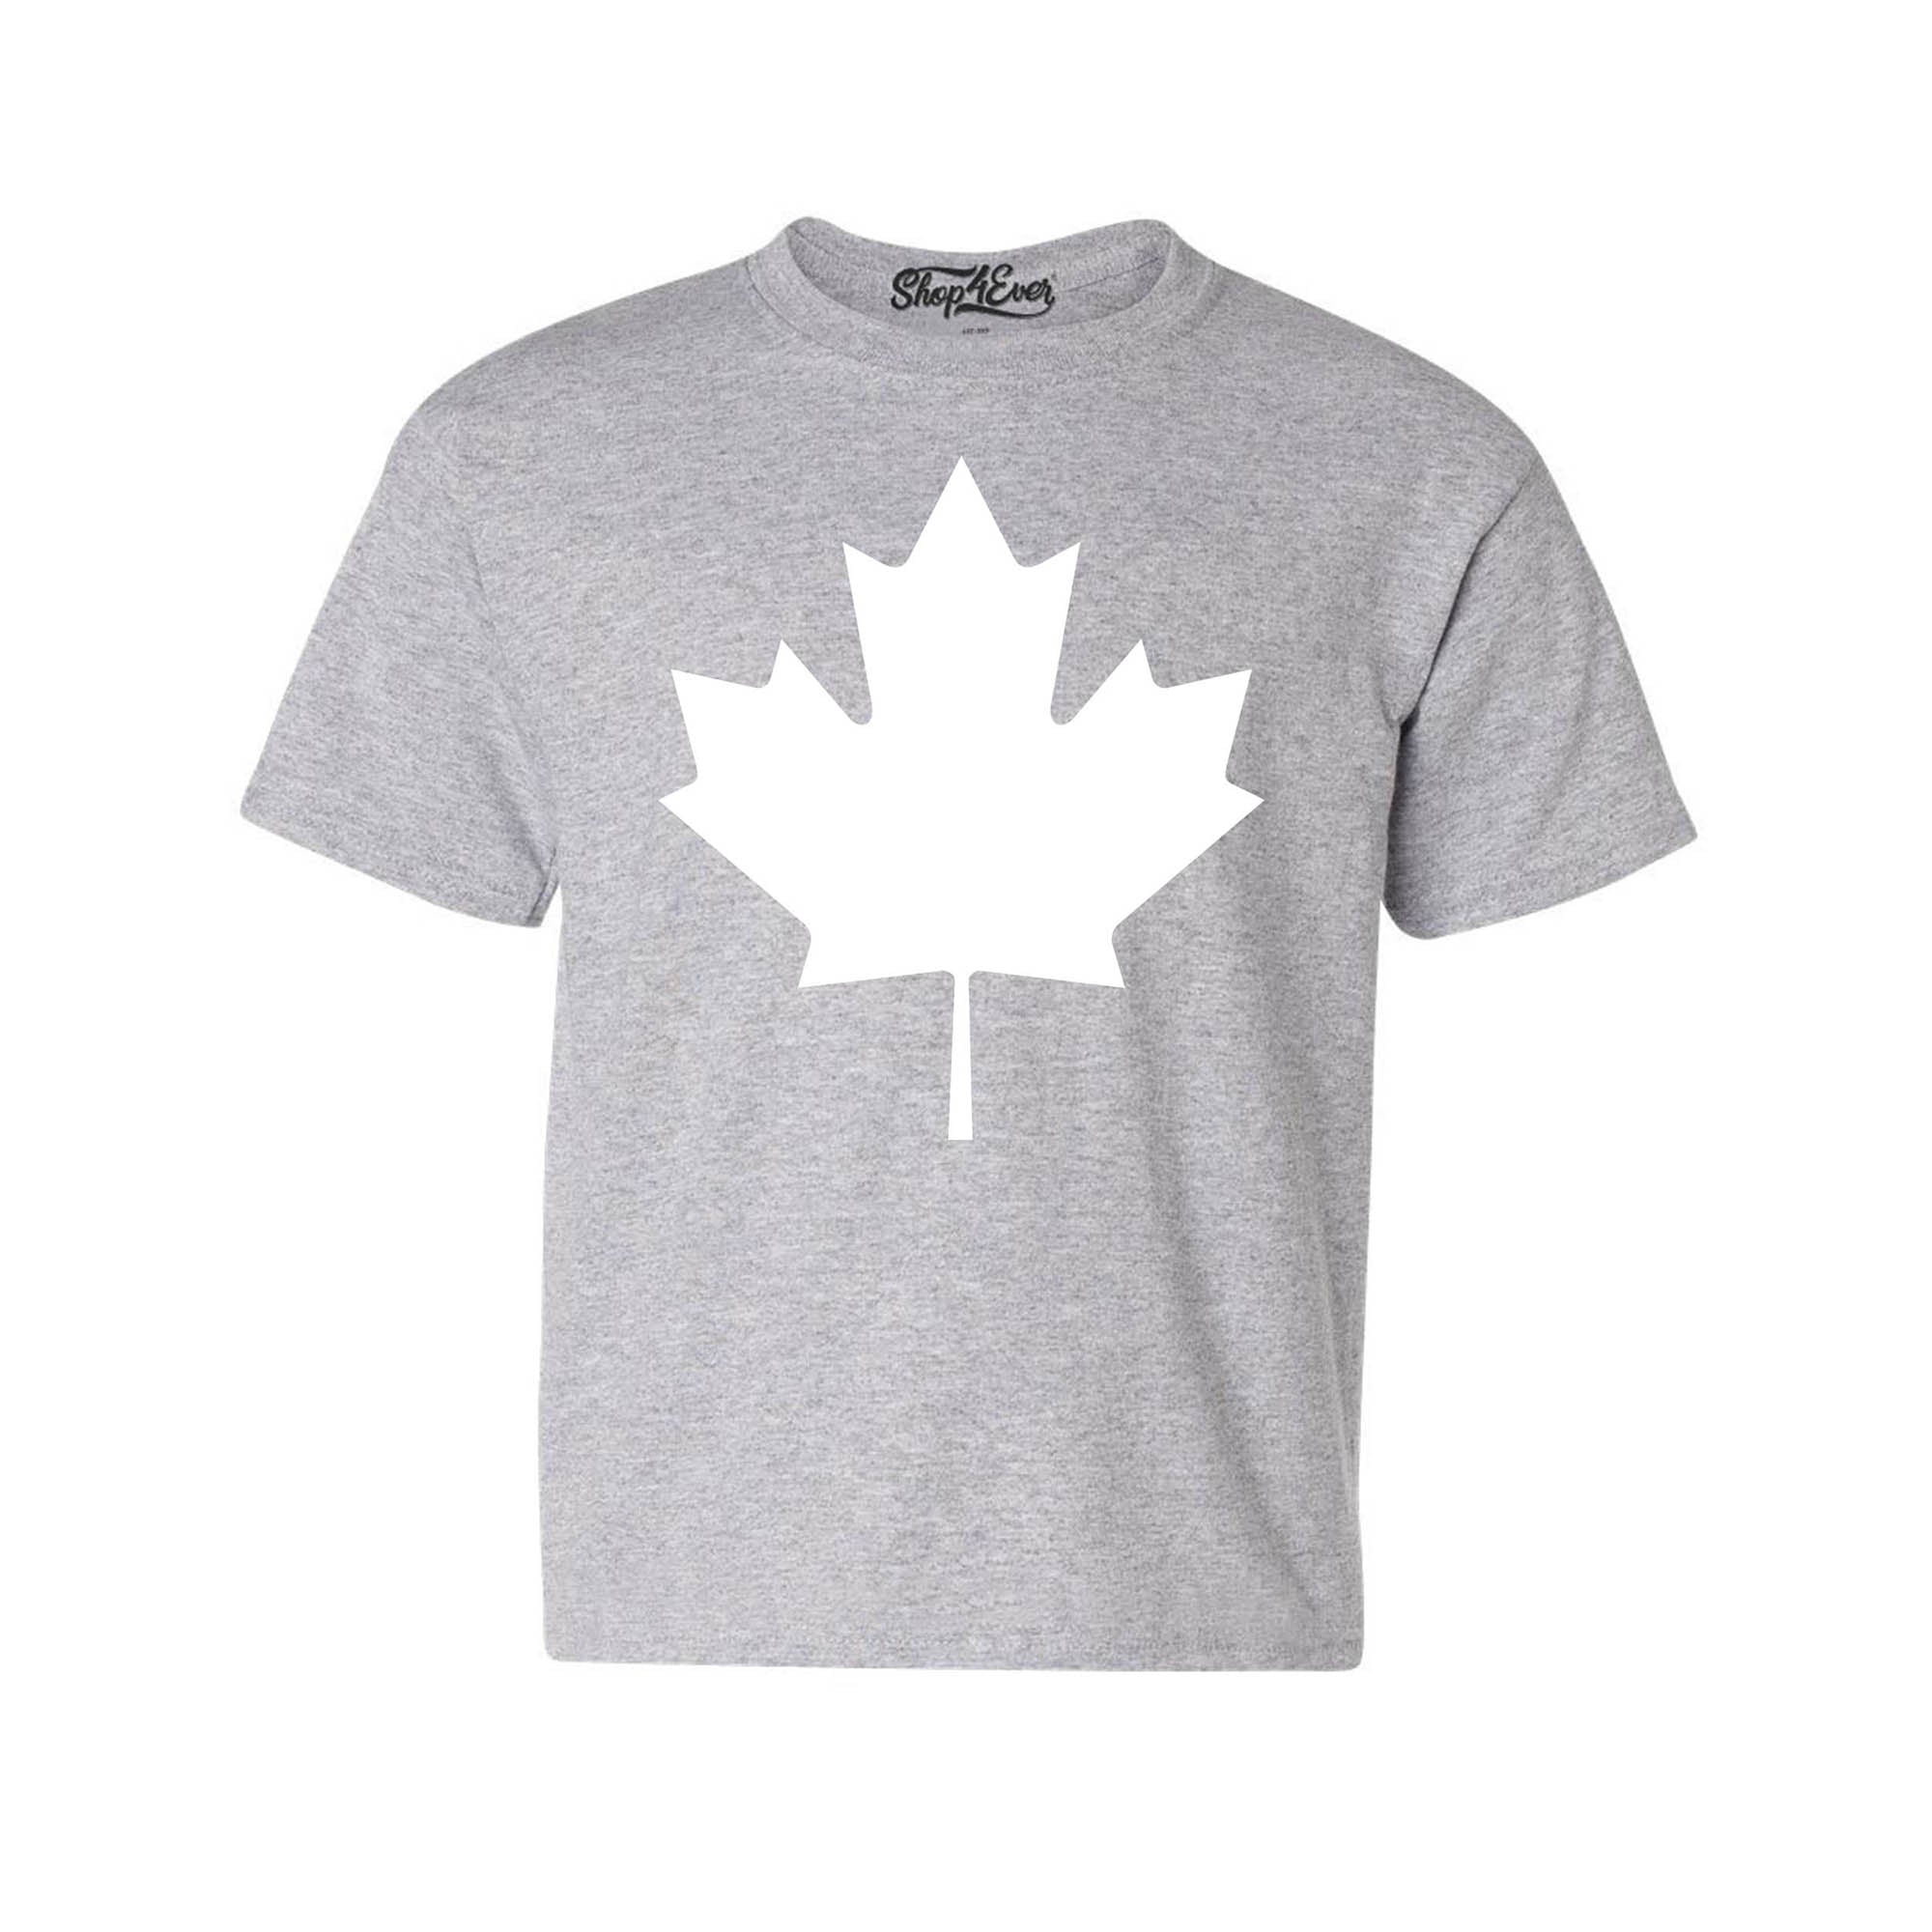 Canada White Maple Leaf Youth's T-Shirt Canadian Child Kids Tee